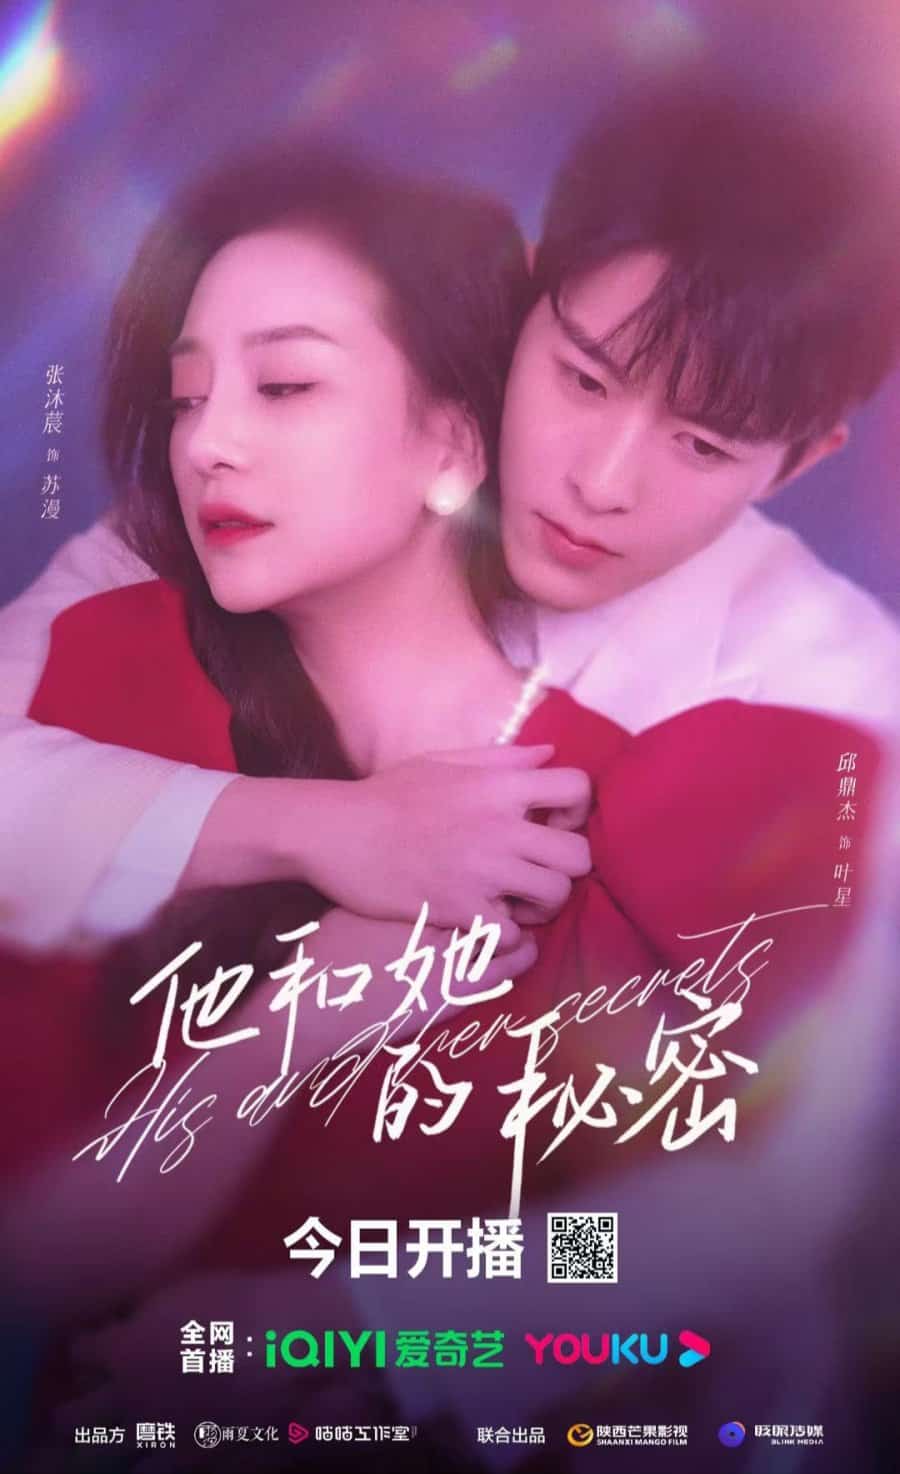 His and Her Secrets - Sinopsis, Pemain, OST, Episode, Review